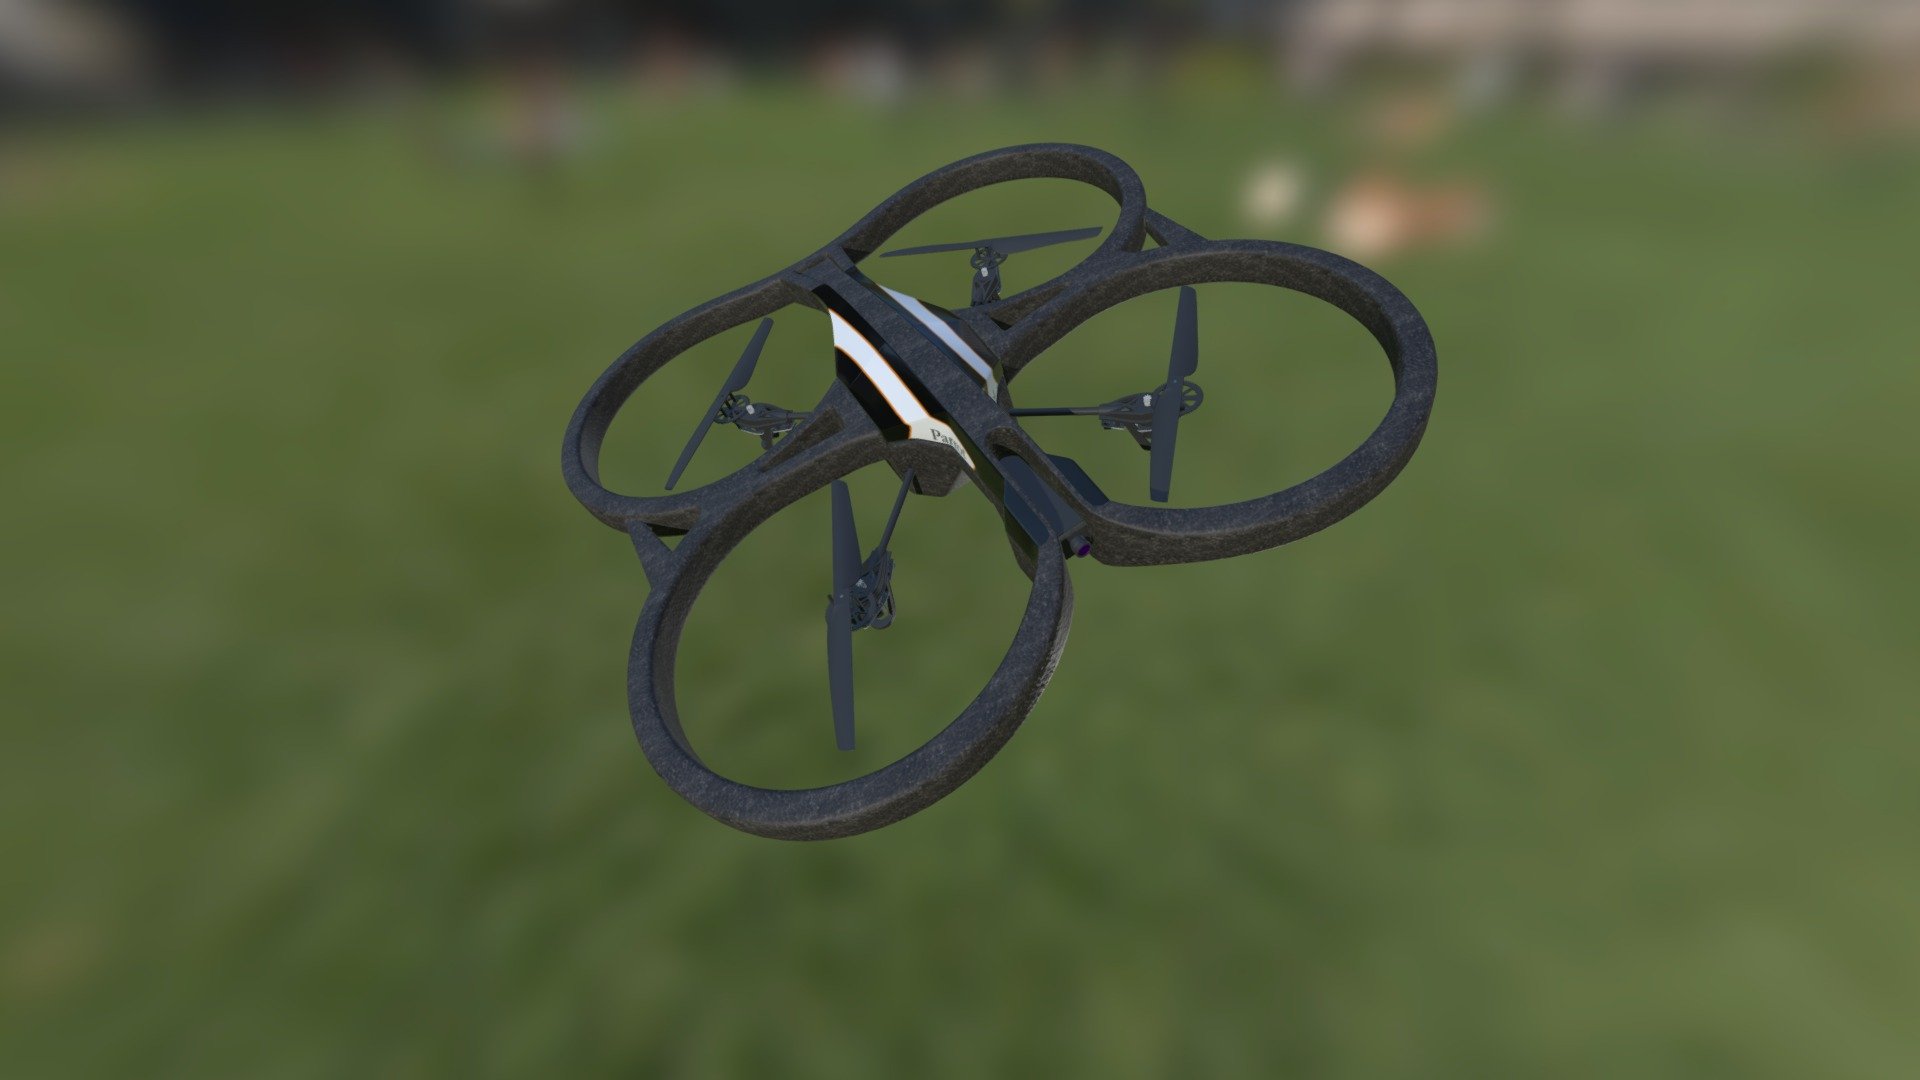 Get the AR-Drone 2.0 here - Parrot AR-Drone 2.0 - 3D model by Mestaty 3d model